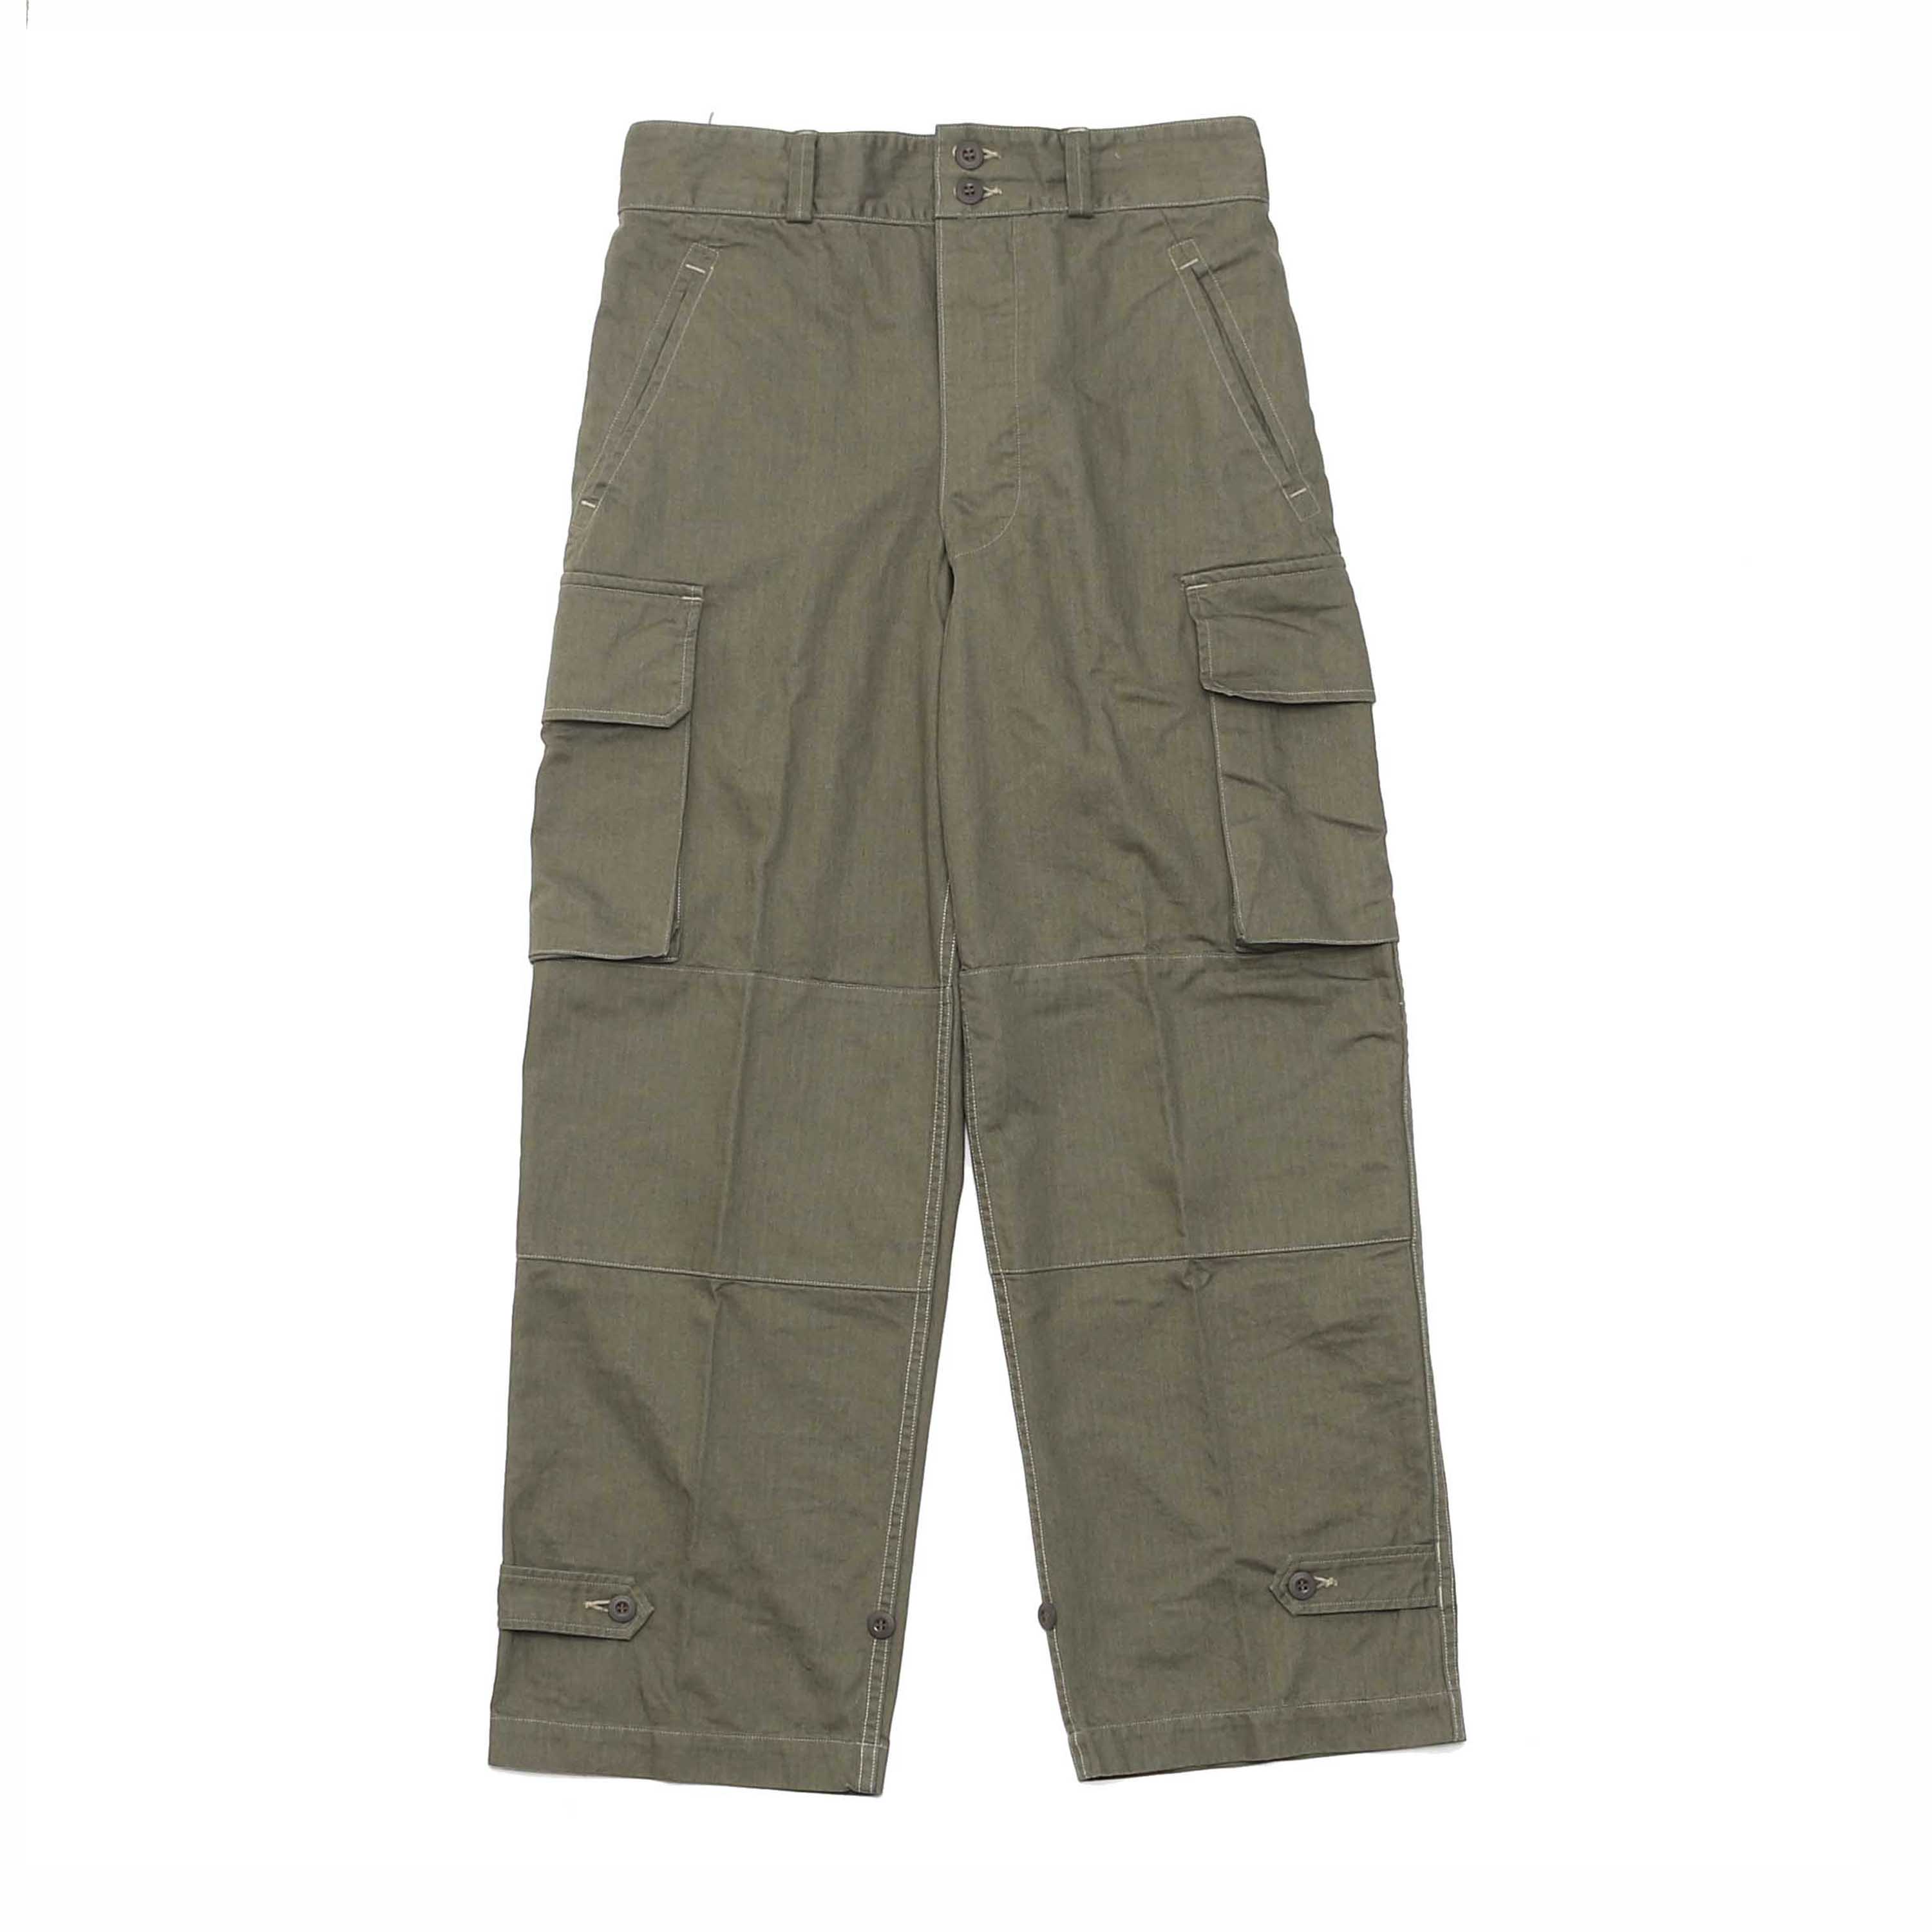 M-47 FRENCH ARMY CARGO PANTS - ARMY GREEN